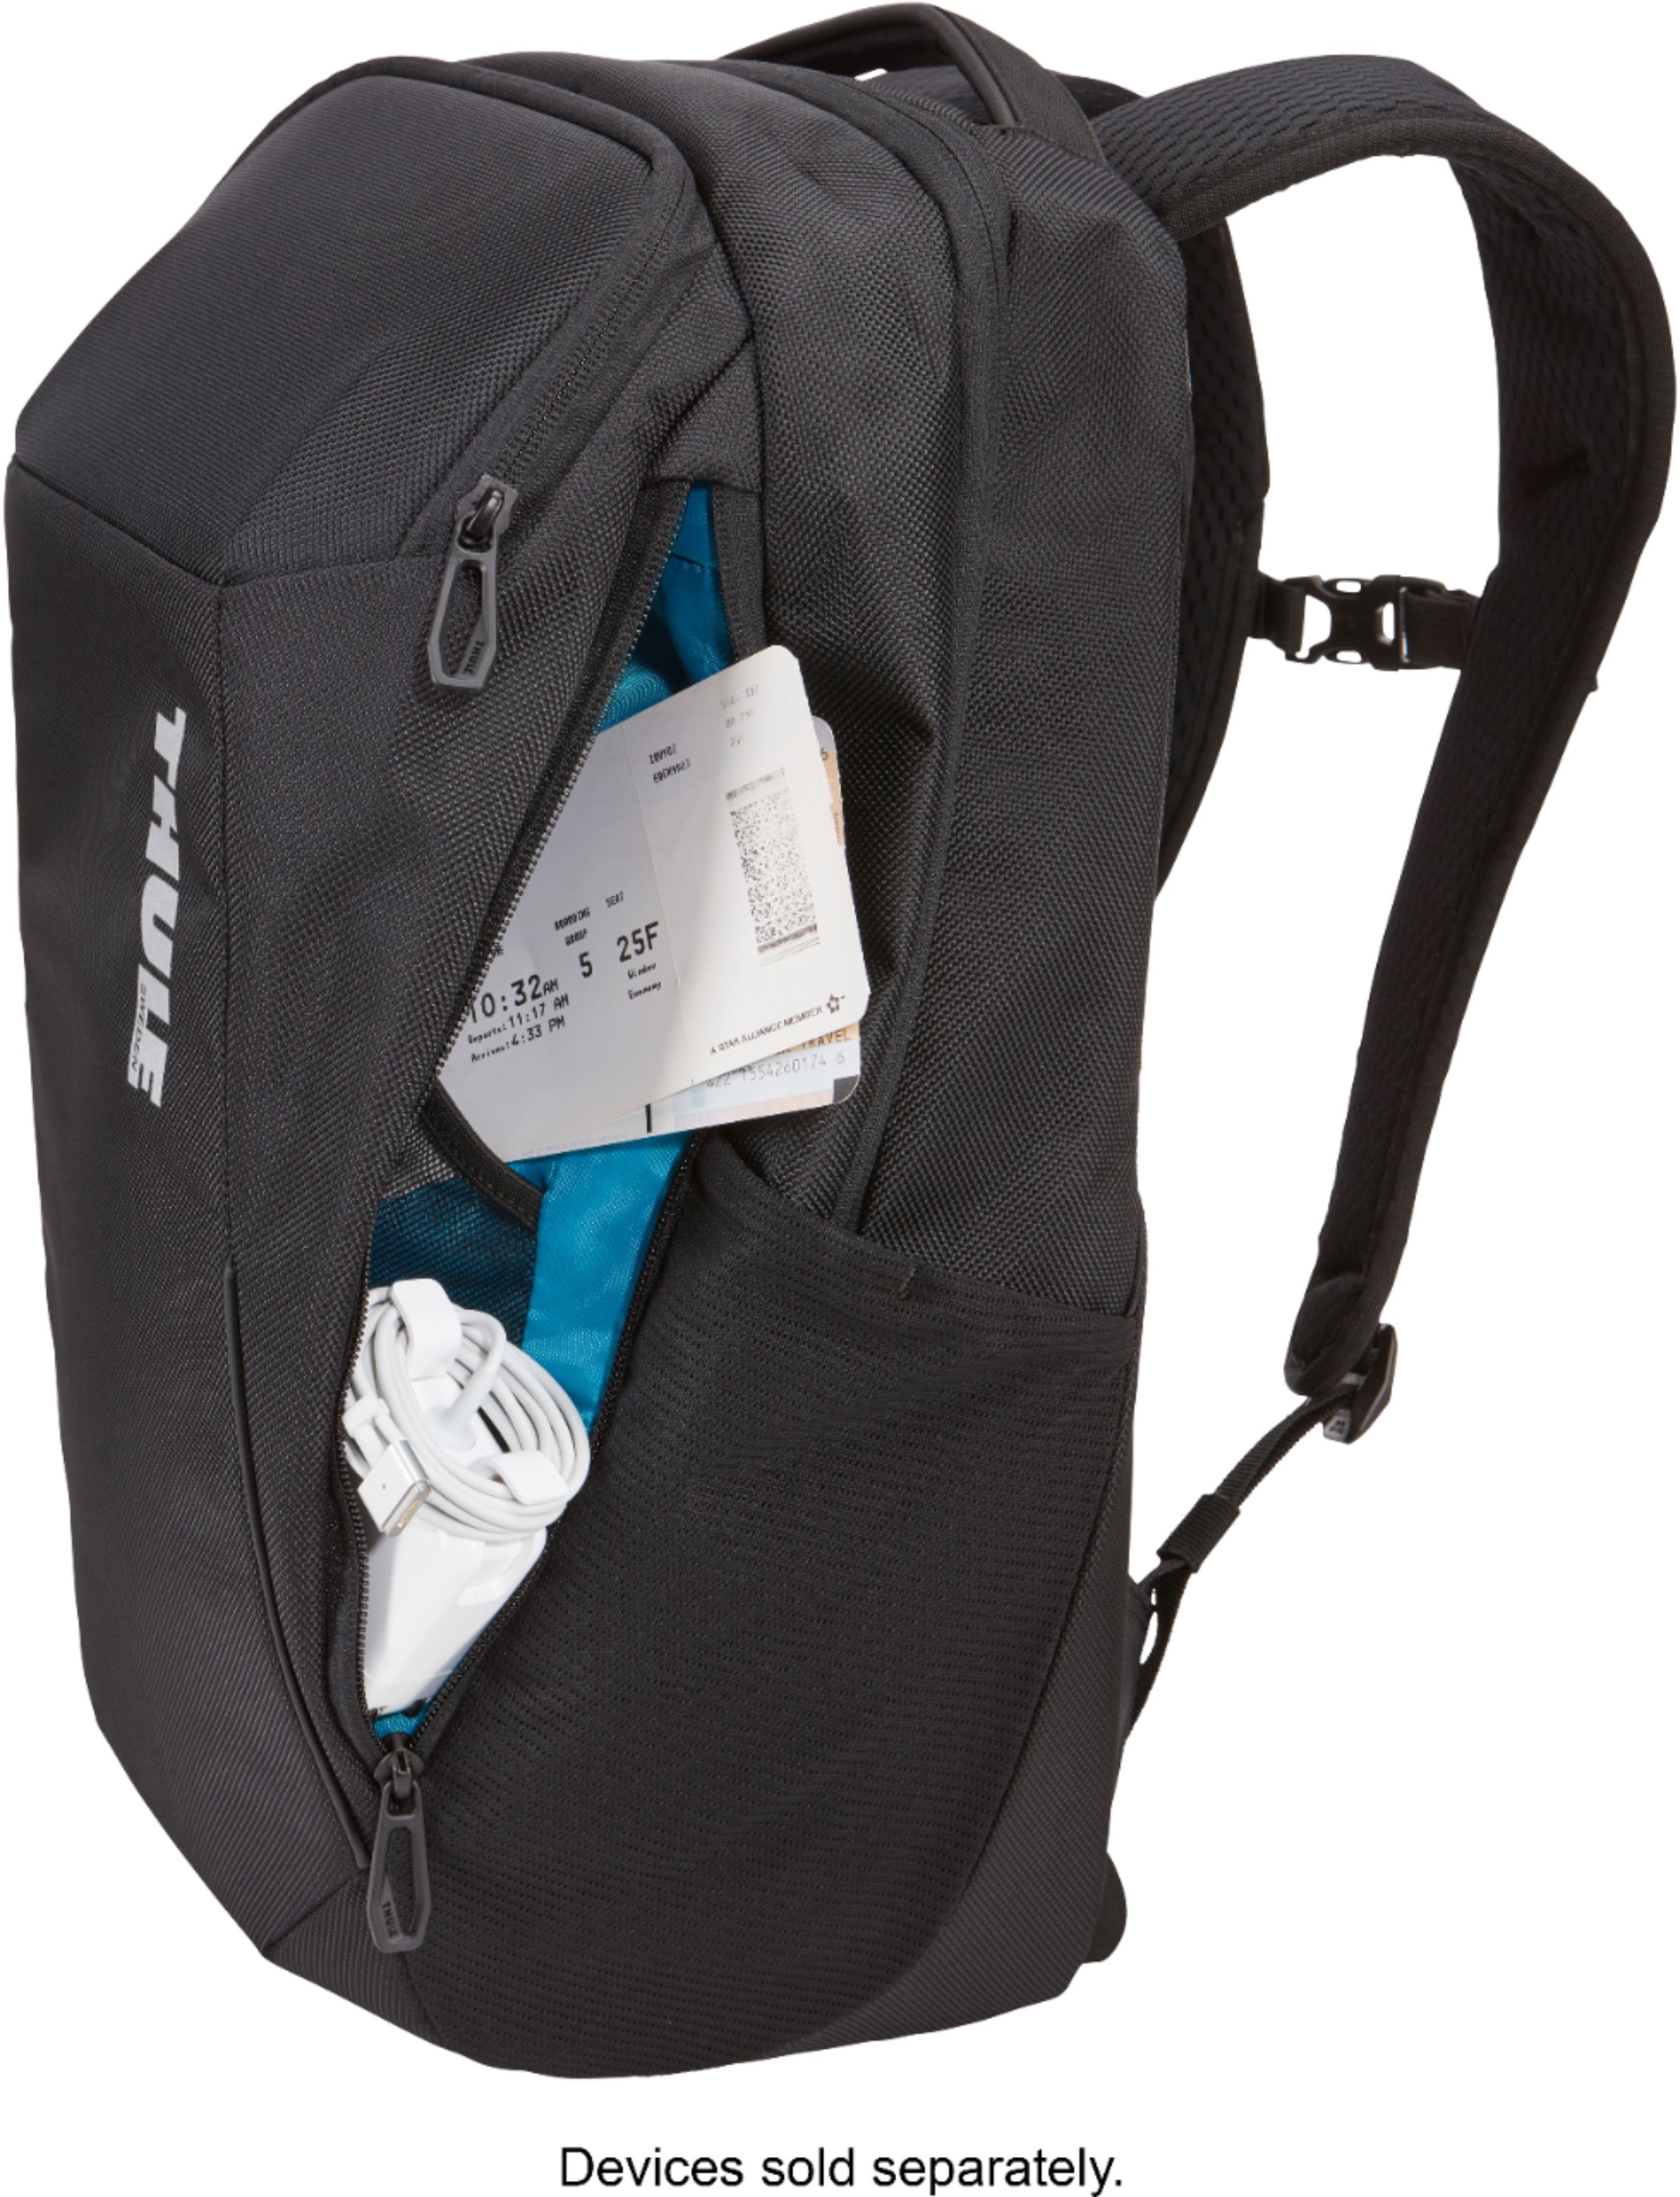 THULE Accent Backpack 20L - Eastern Mountain Sports